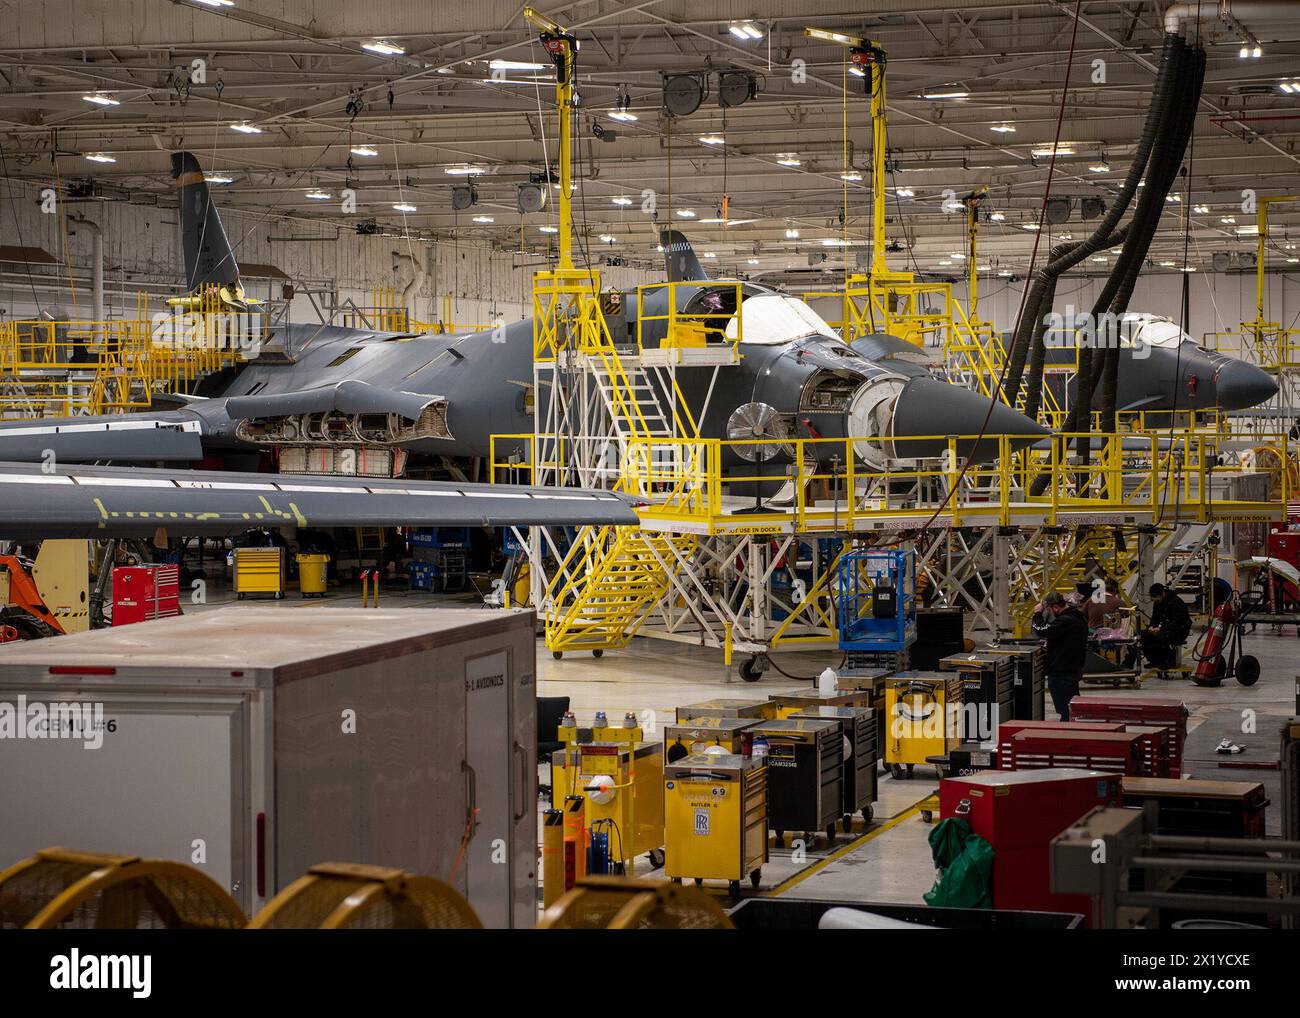 TINKER AIR FORCE BASE, Okla. — B-1 aircraft undergo programmed depot maintenance at the Oklahoma City Air Logistics Complex at Tinker Air Force Base, Oklahoma, Dec. 4, 2022. Normally upgrades such as the announced B-1 Embracing Agile Scheduling Team upgrade are performed when the aircraft returns for its scheduled maintenance cycle, but BEAST is being completed out of cycle to improve the aircraft’s lethality sooner. (U.S. Air Force photo by Carter Denton) Stock Photo